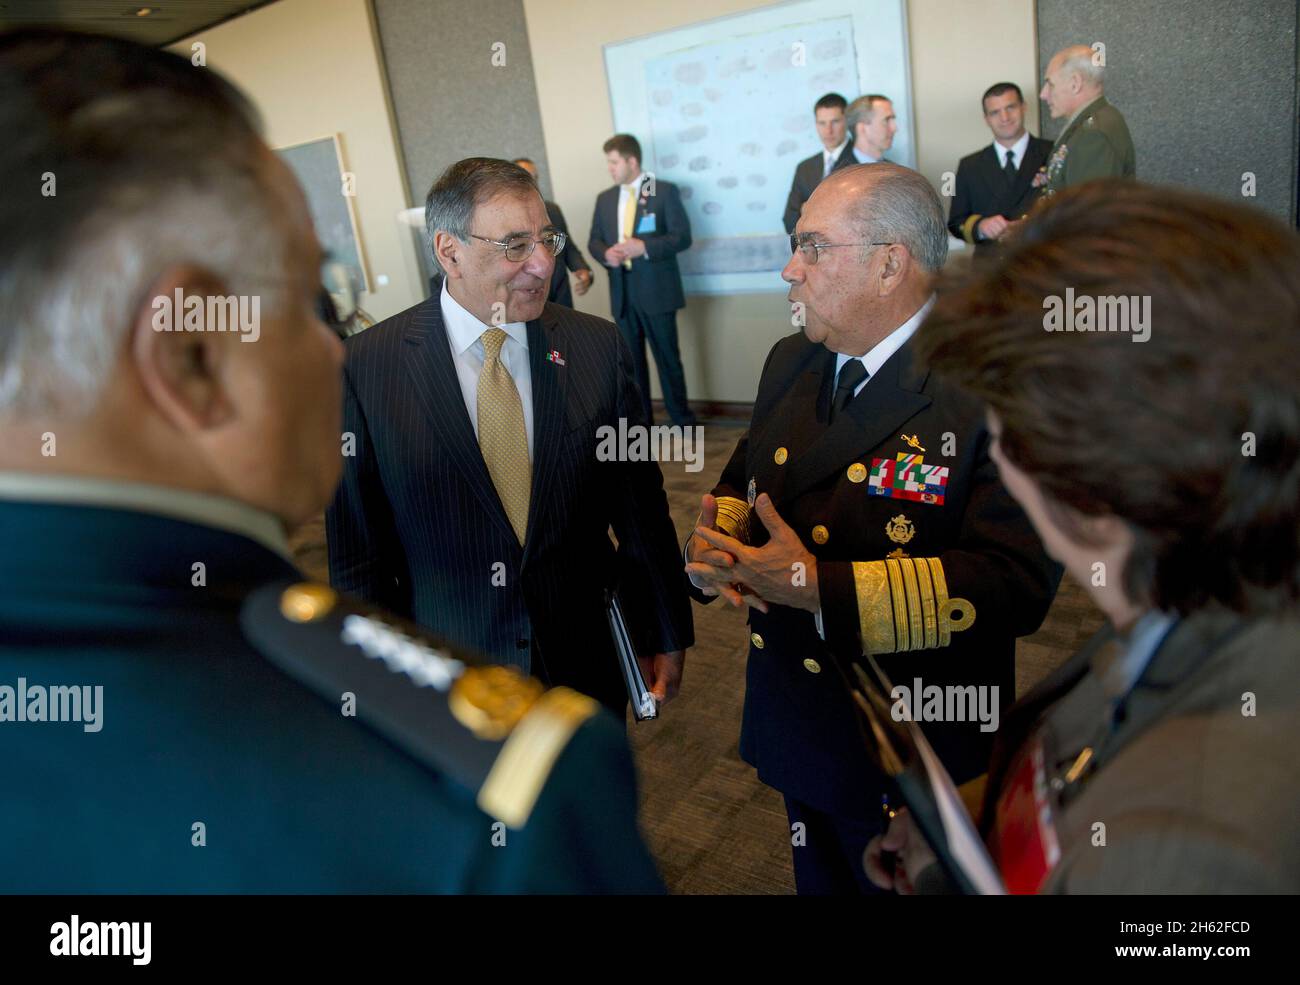 Secretary of Defense Leon Panetta converses with Mexican Secretary of National Defense Gen. Guillermo Galvan shortly before beginning trilateral meetings with Defense ministers from Canada and Mexico in Ottawa, Canada, on March 27, 2012 Stock Photo